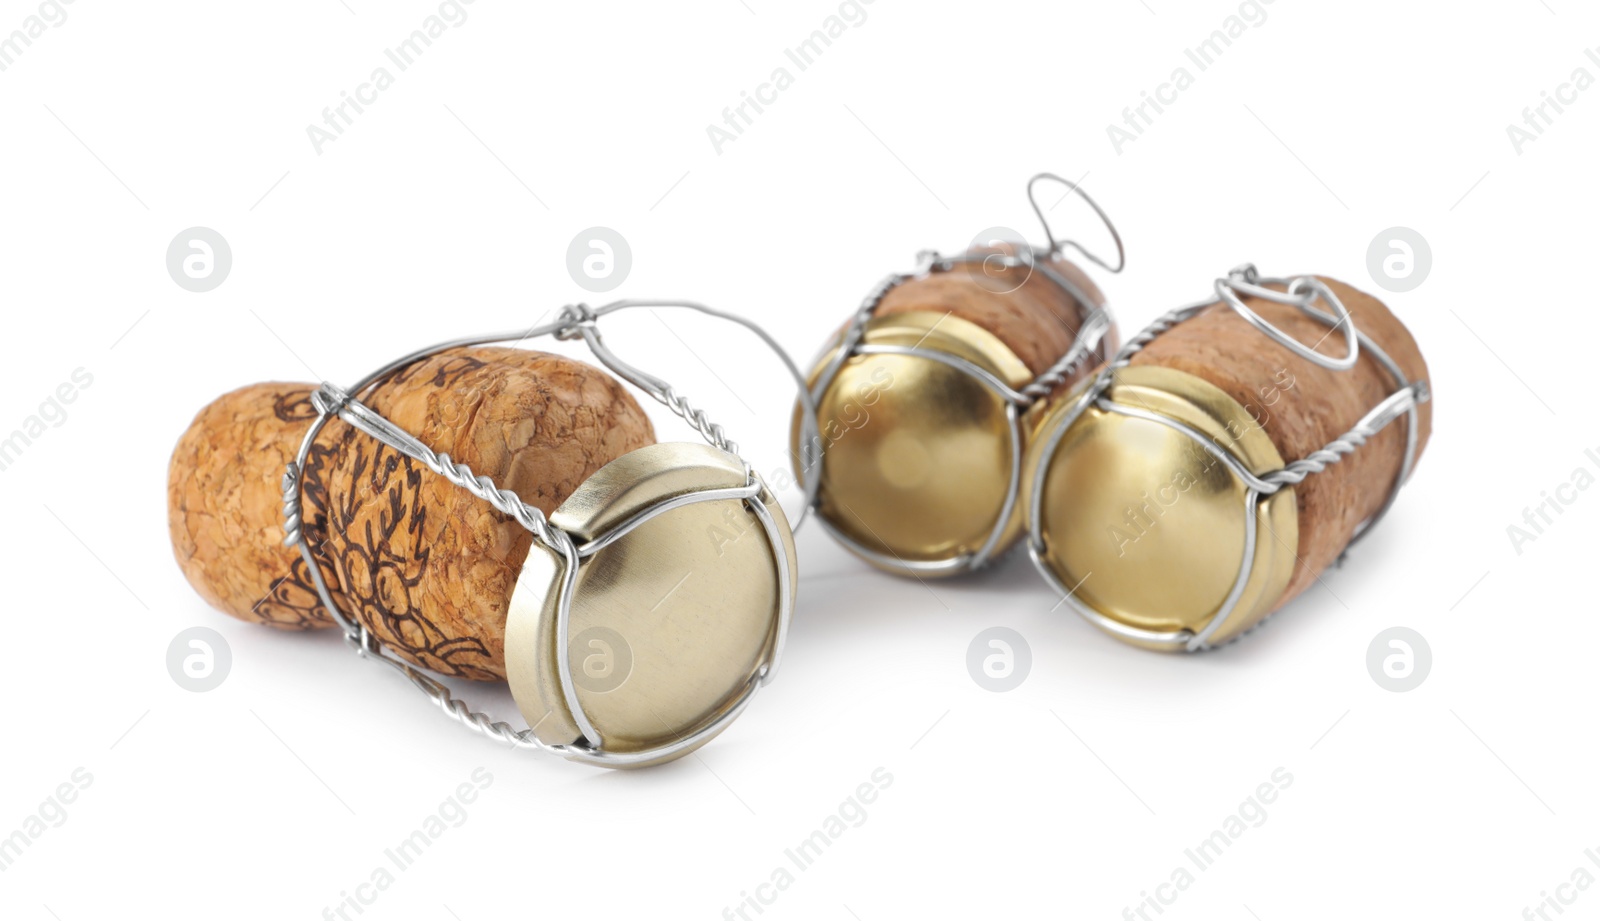 Photo of Corks of sparkling wine and muselet caps on white background